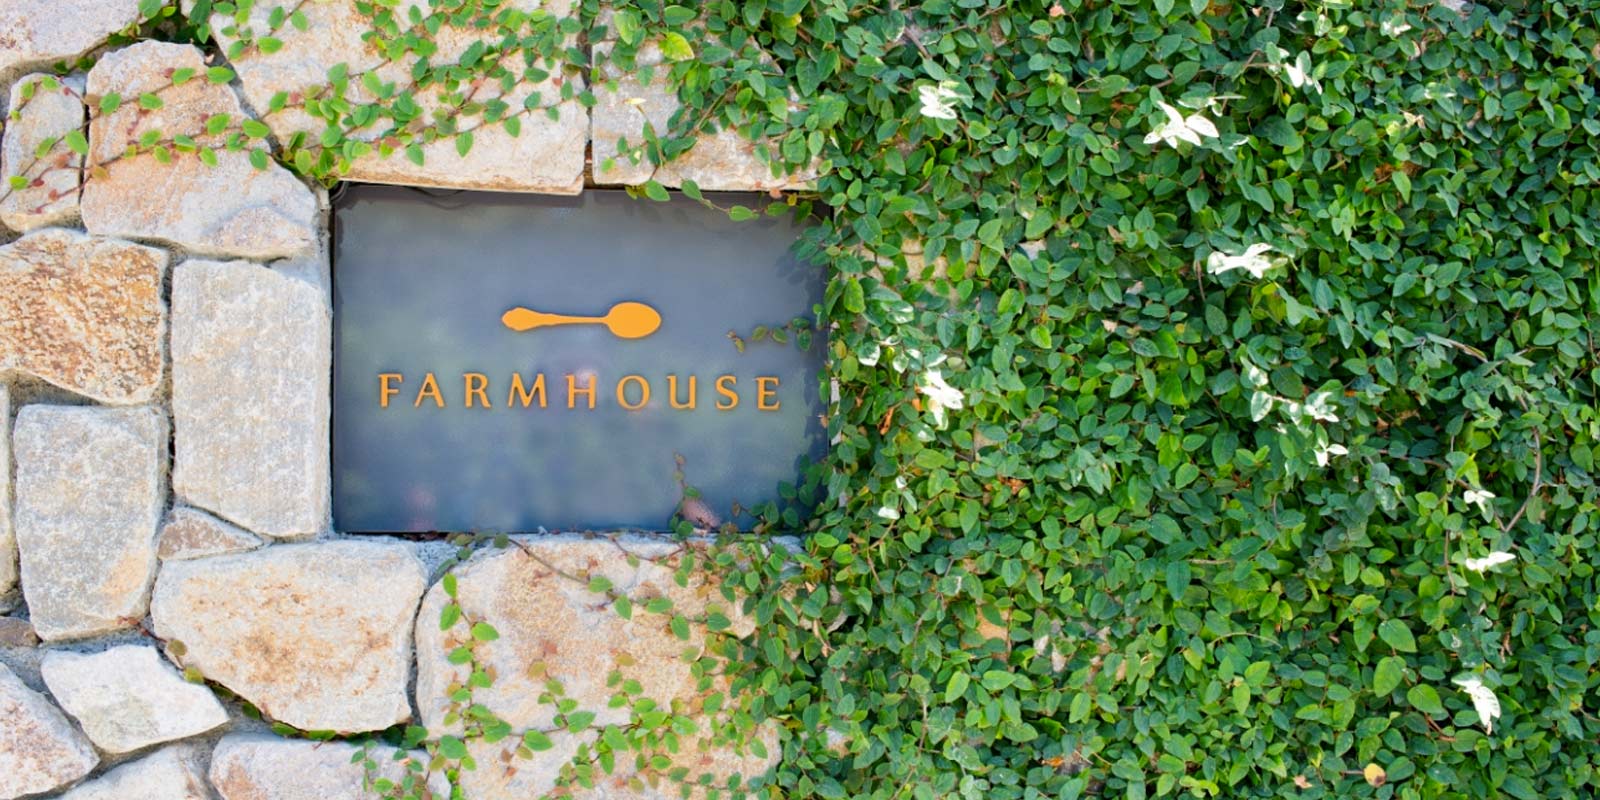 farmhouse entrance sign on rock wall with vines